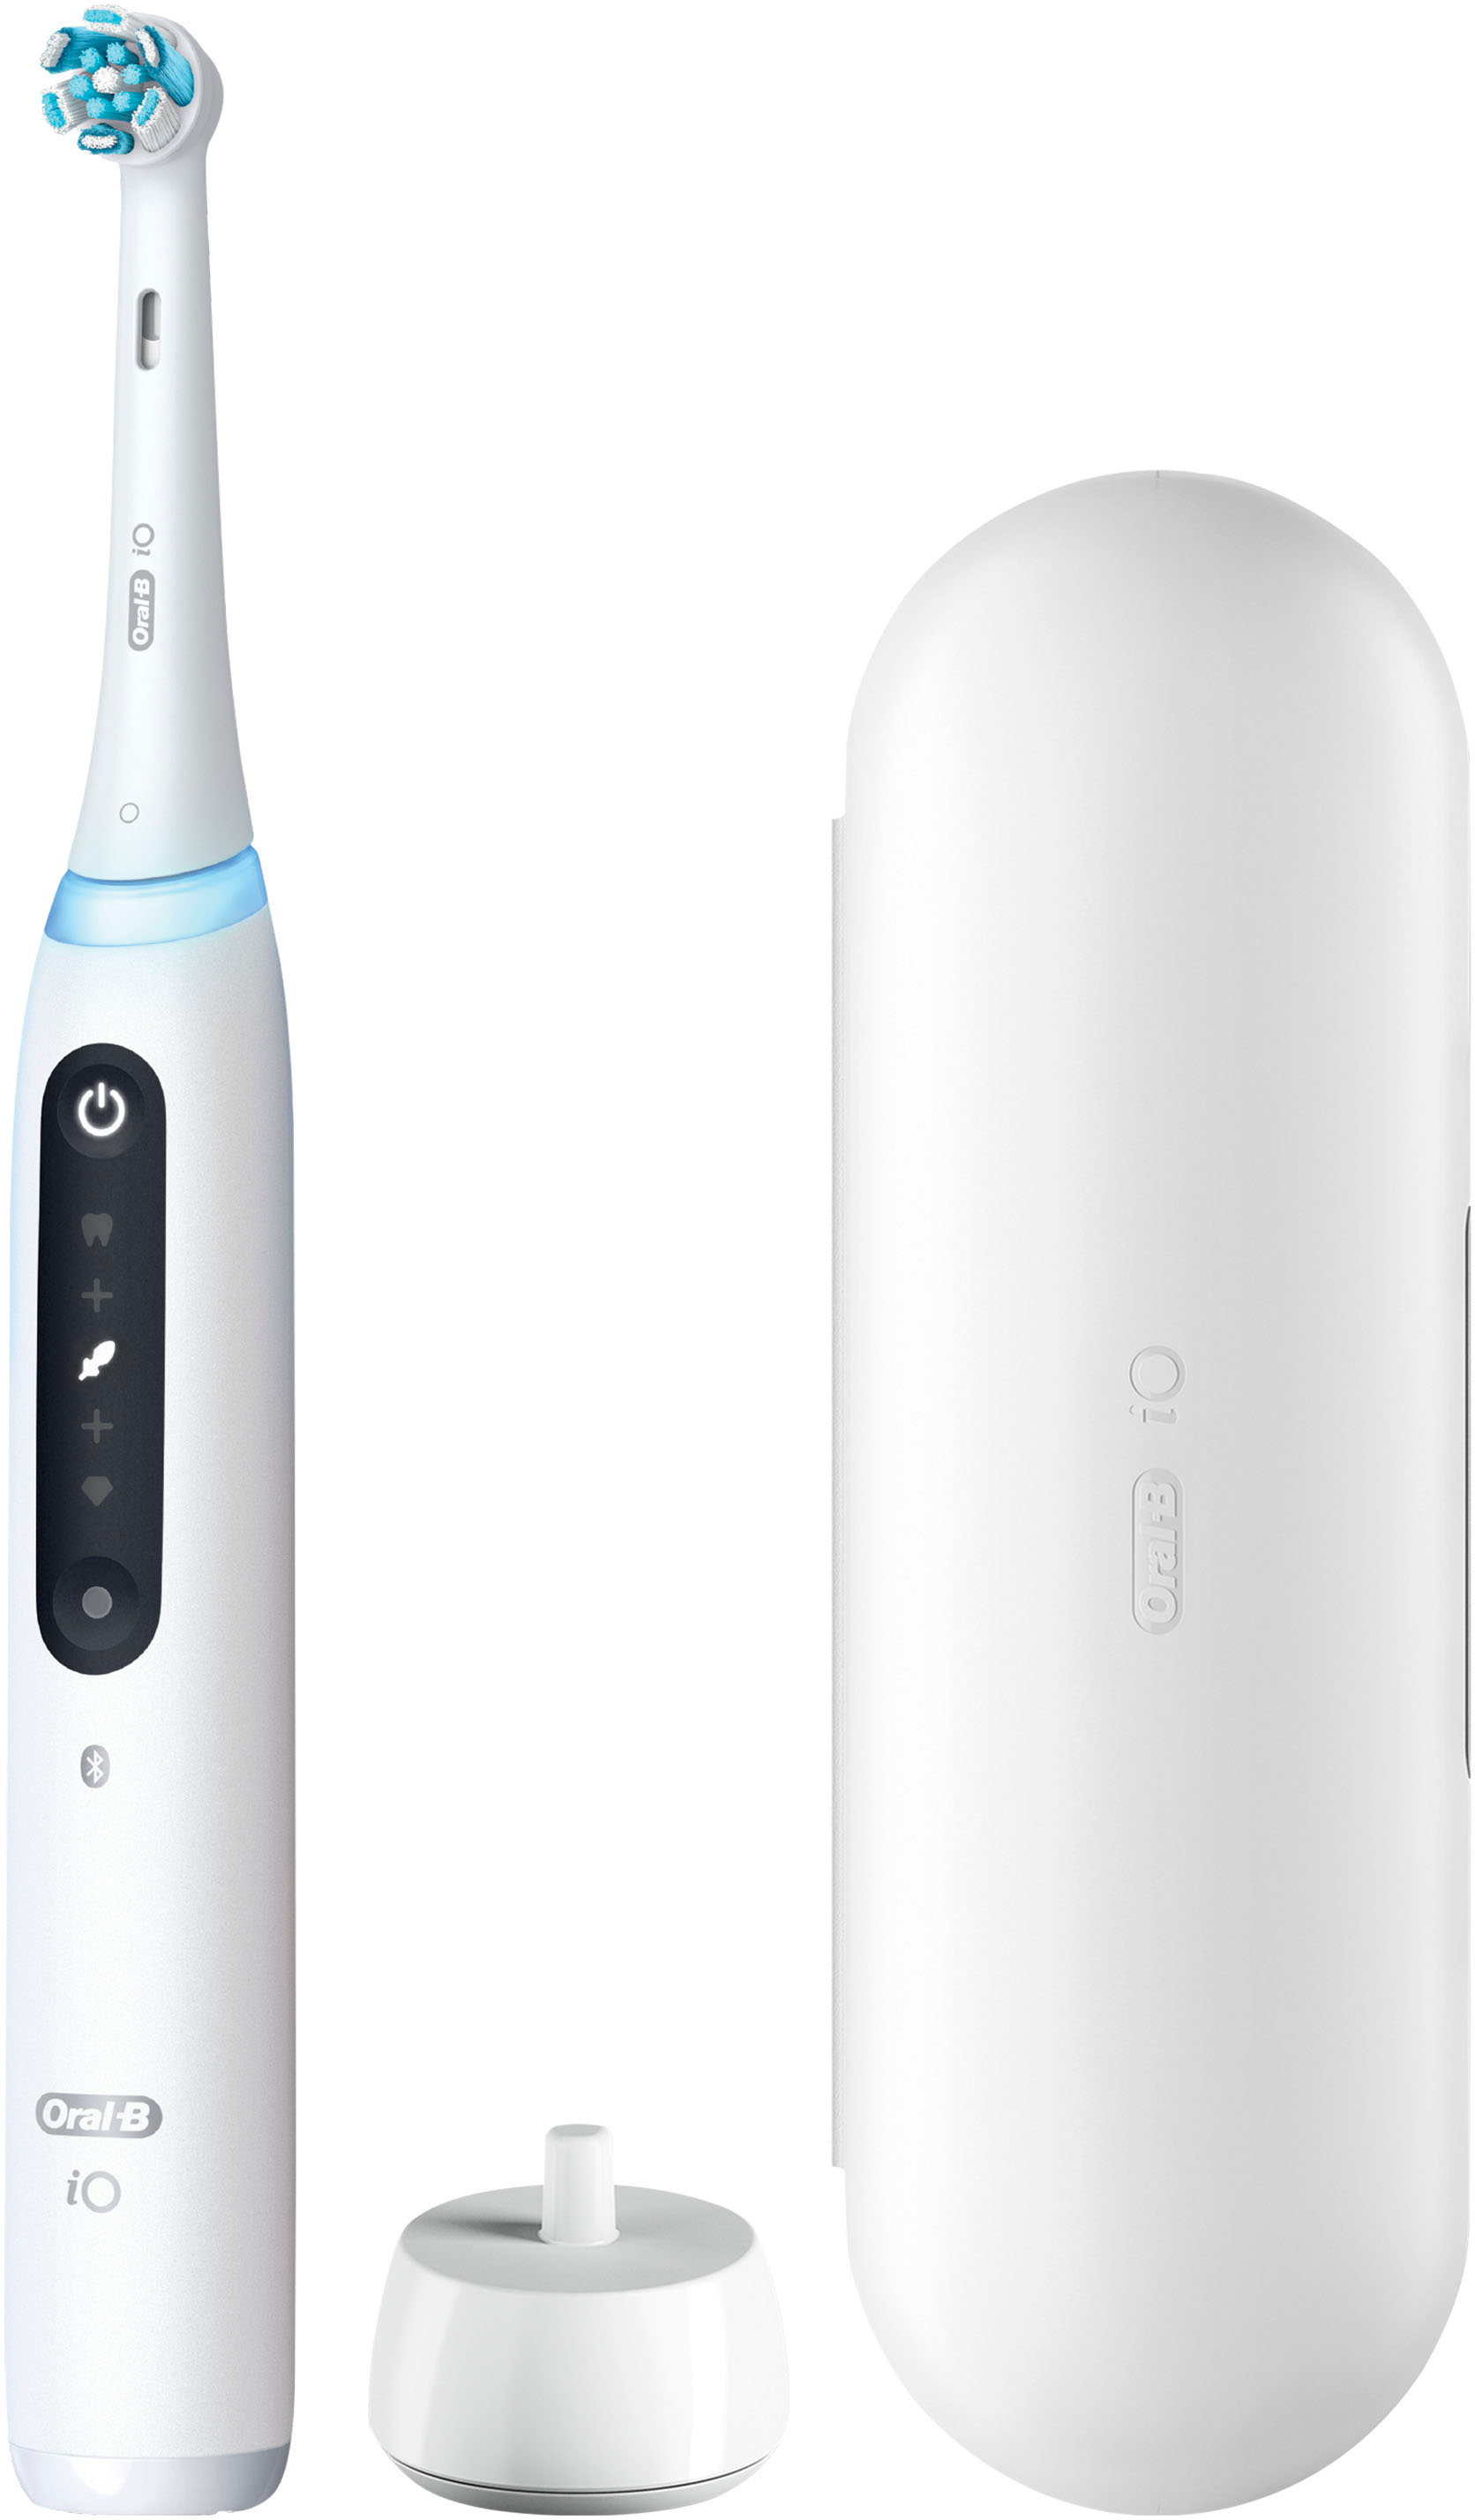 Oral-B - iO Series 5 Rechargeable Electric Toothbrush White w/Brush Head - White